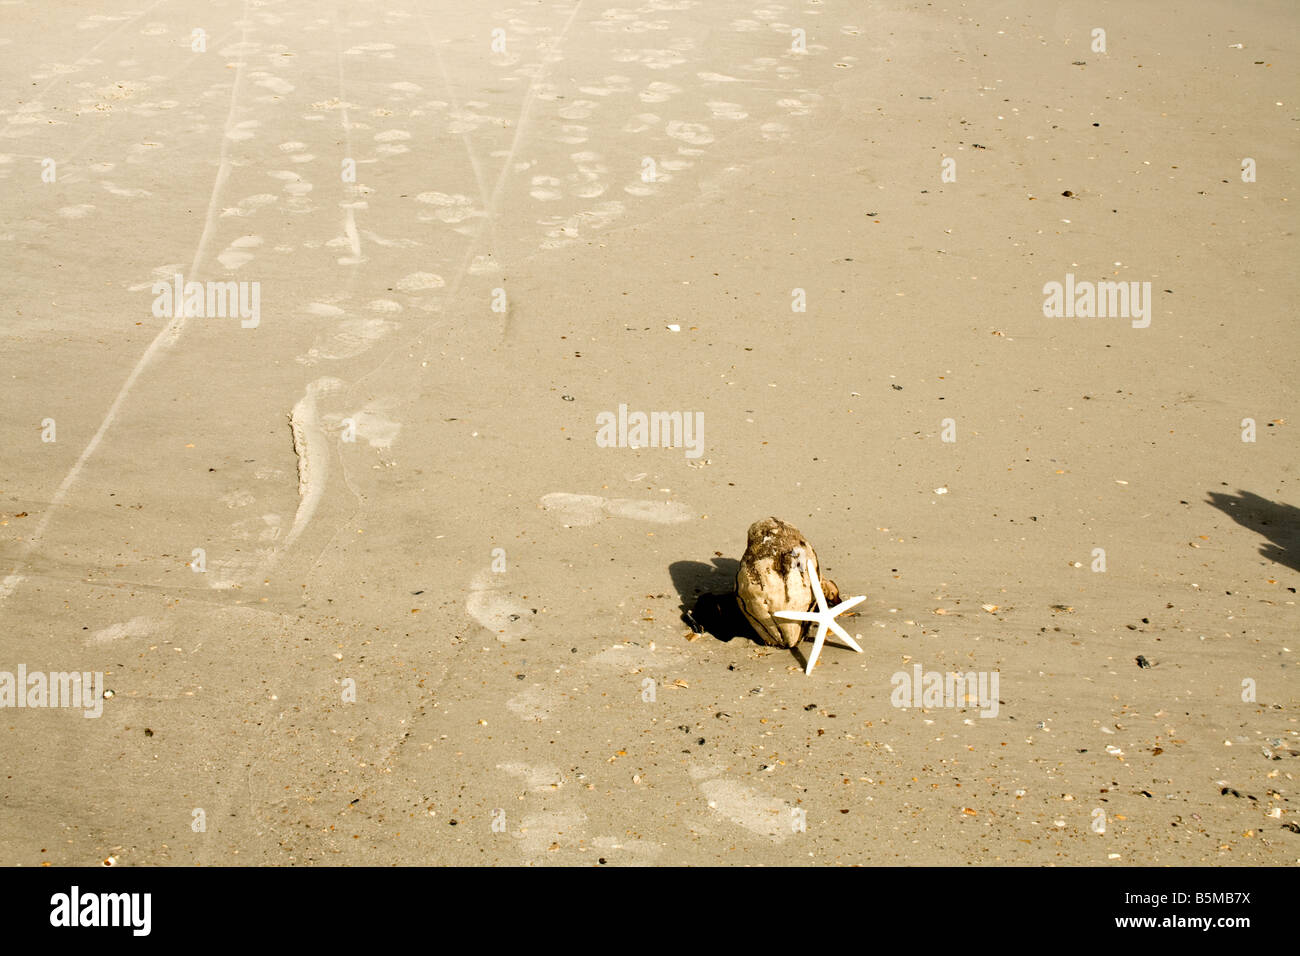 Coconut shell with a white starfish leaning on it with footprints in the sand in Jacksonville Beach, Florida Stock Photo